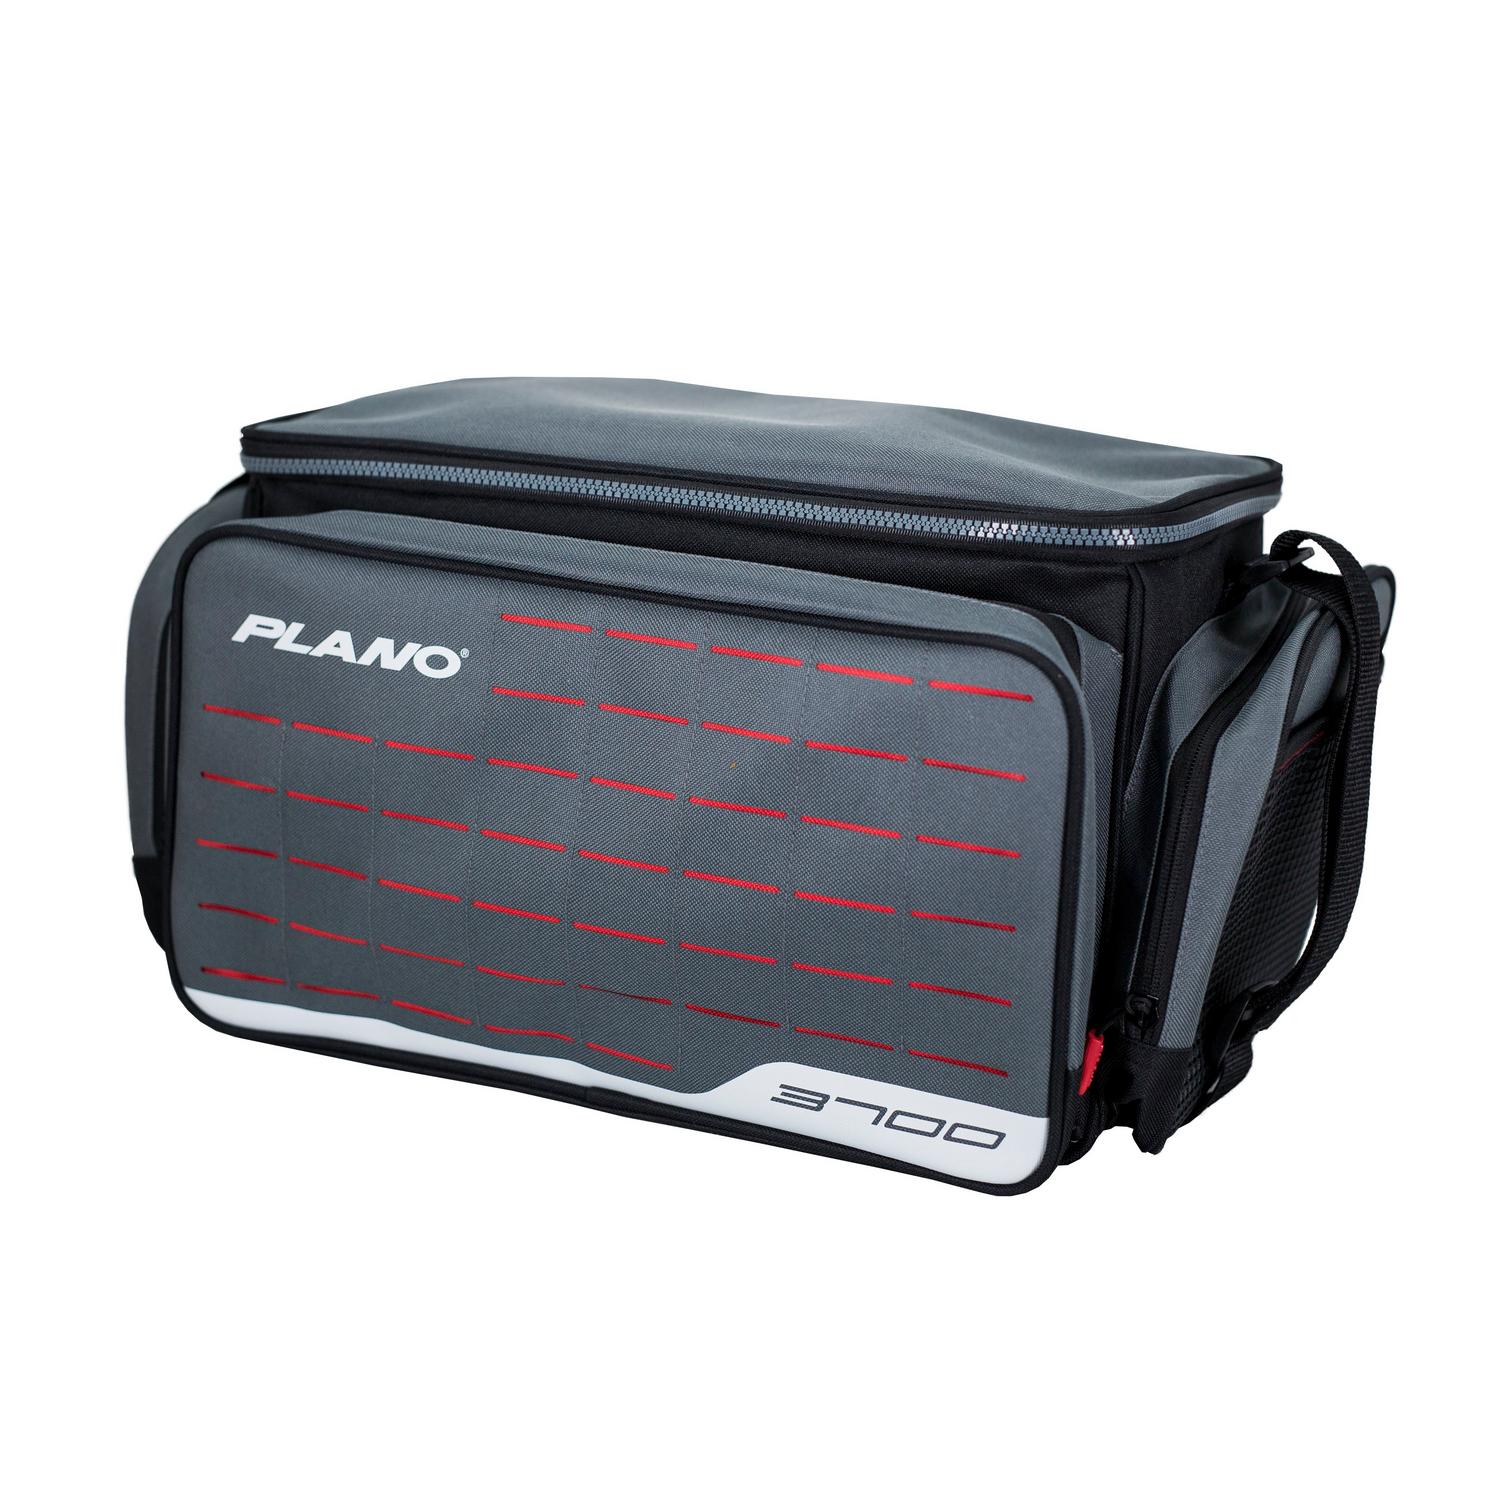 Plano Guide Series Angled Storage System 3600 Tackle Box Organizer Fishing  Bags